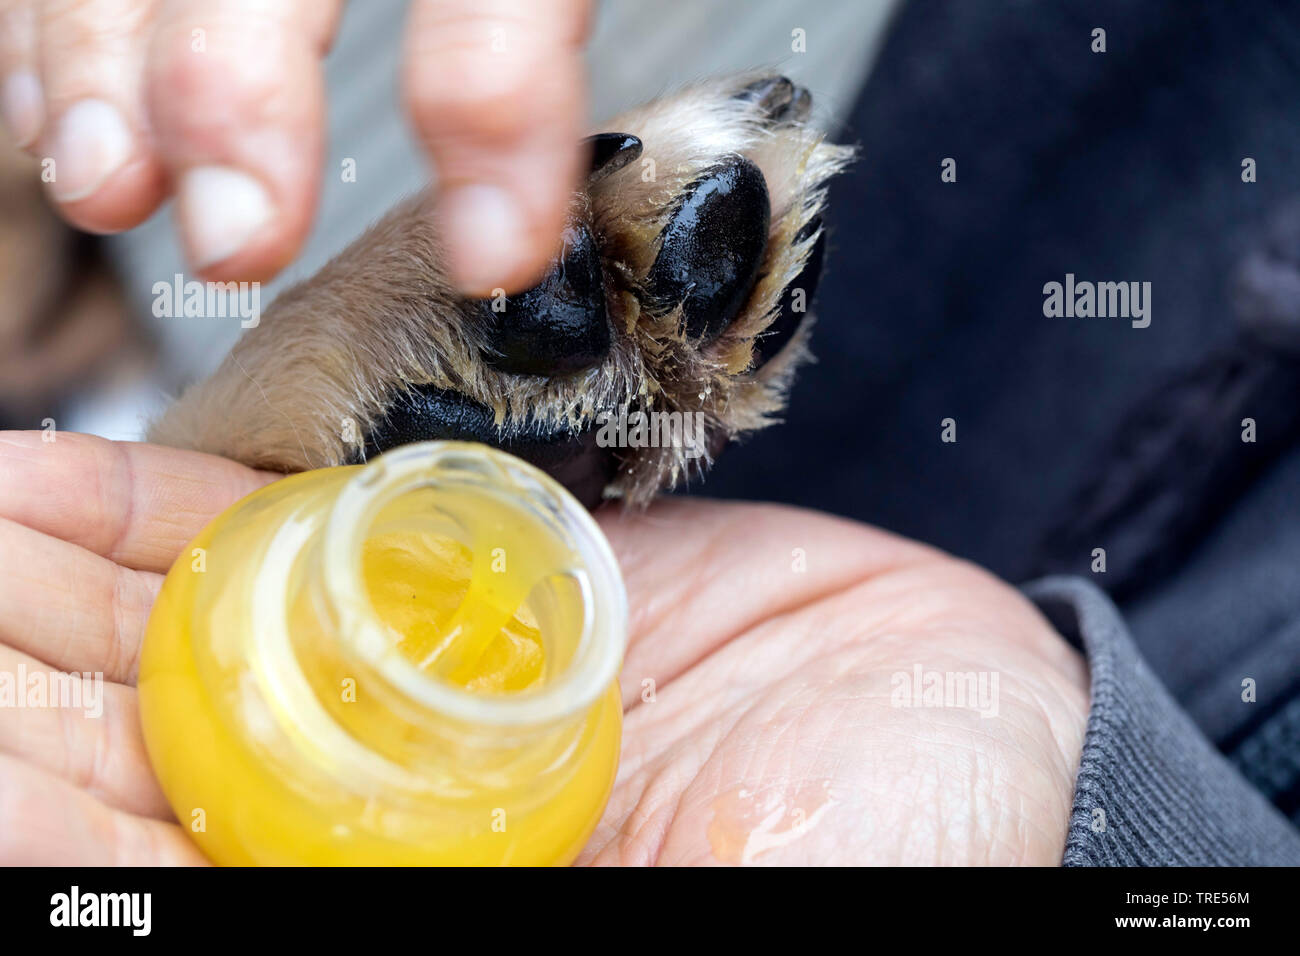 resin creme on a dog's paw, Germany Stock Photo